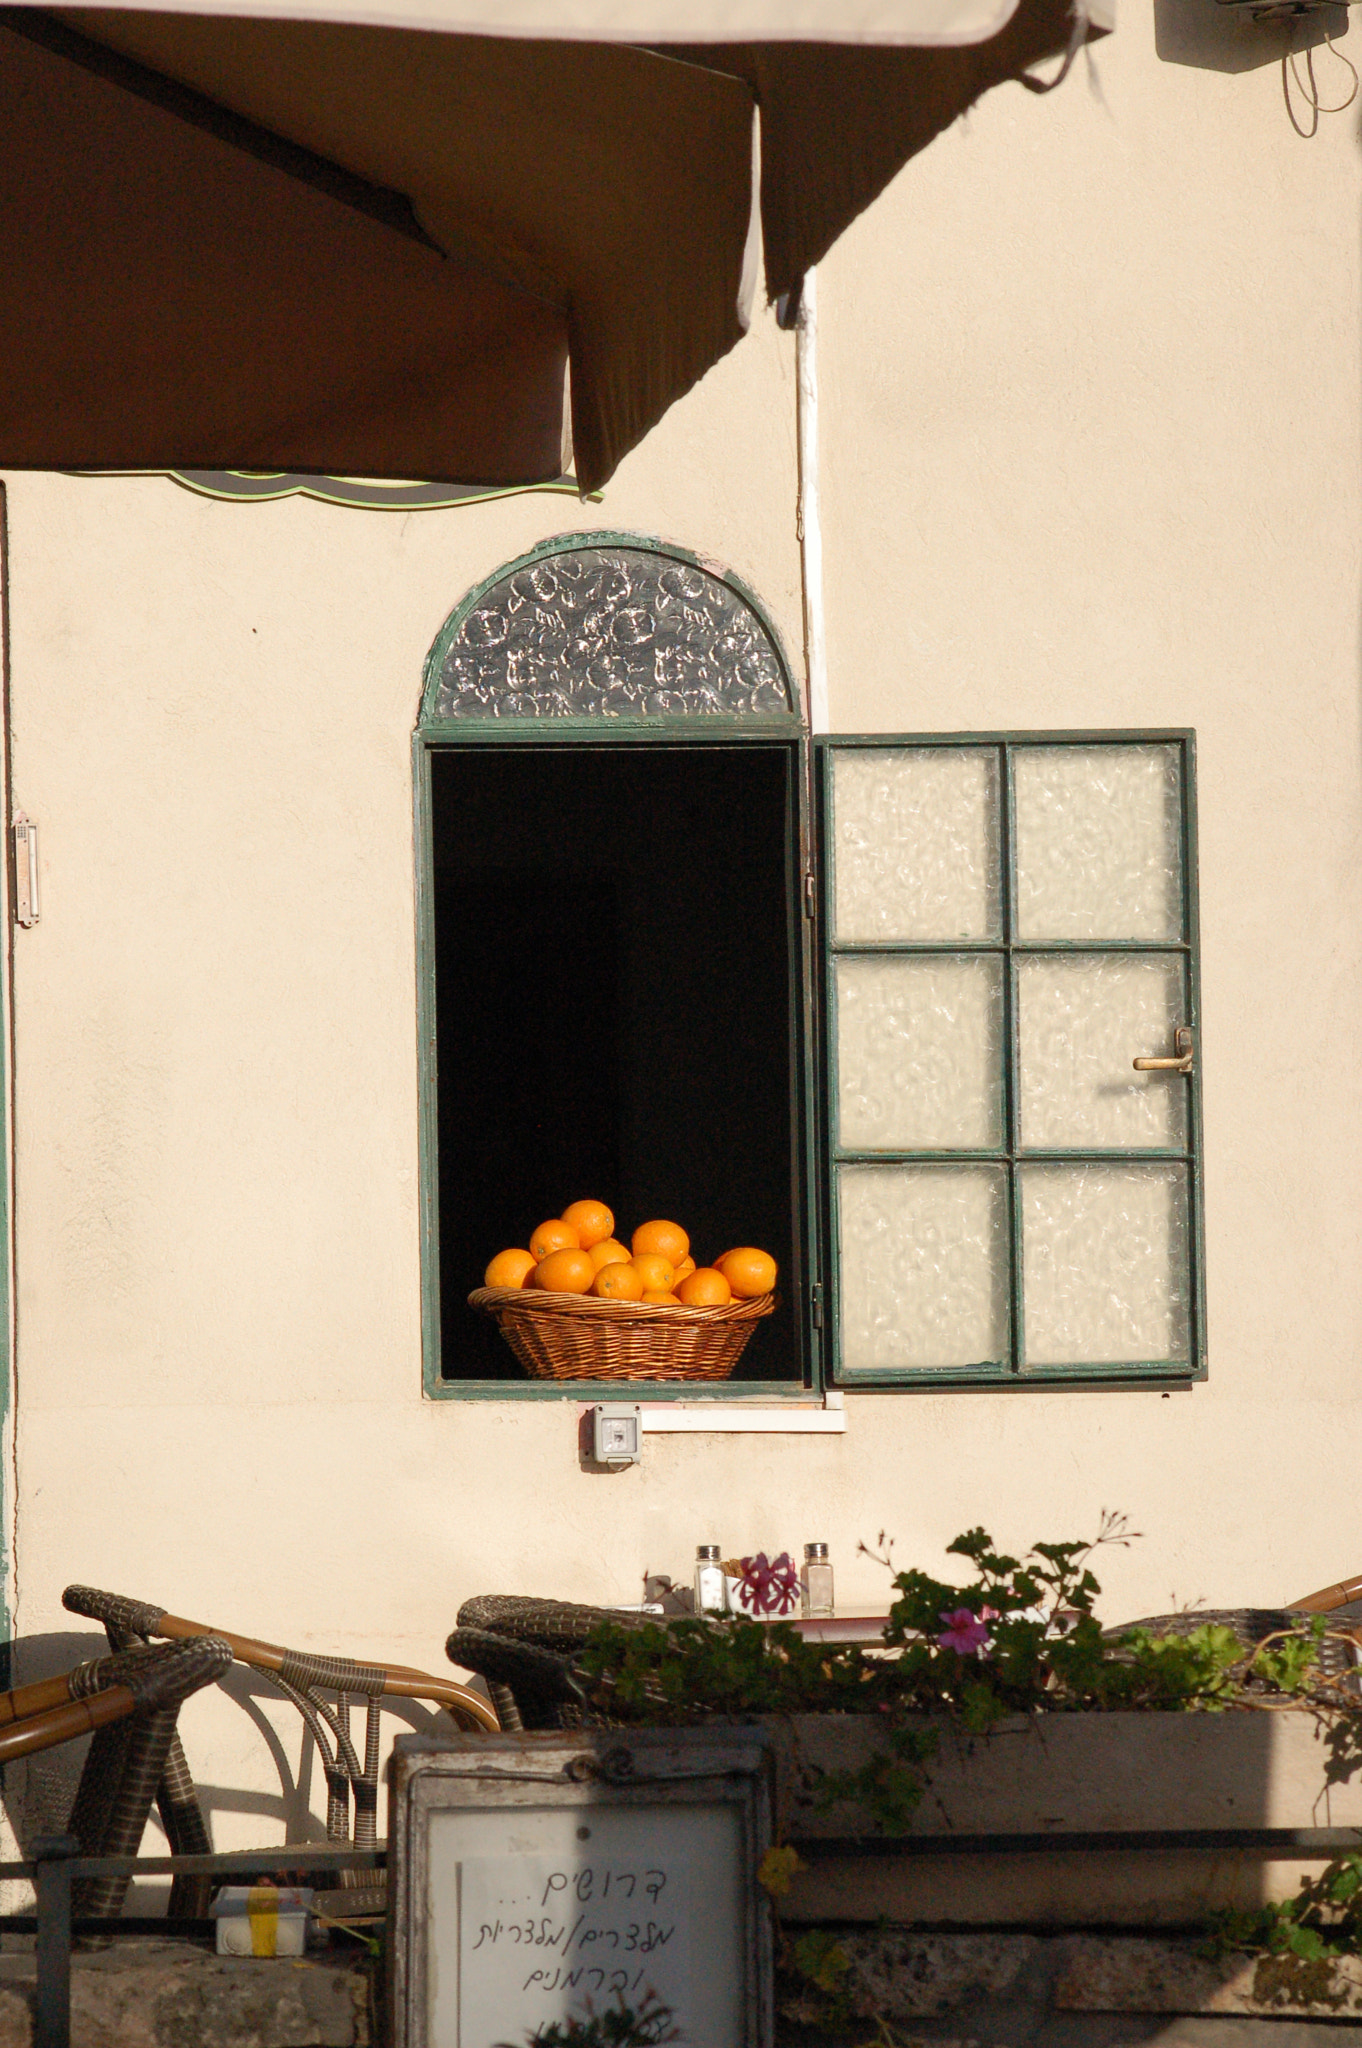 Nikon D50 sample photo. Fruit from the window photography